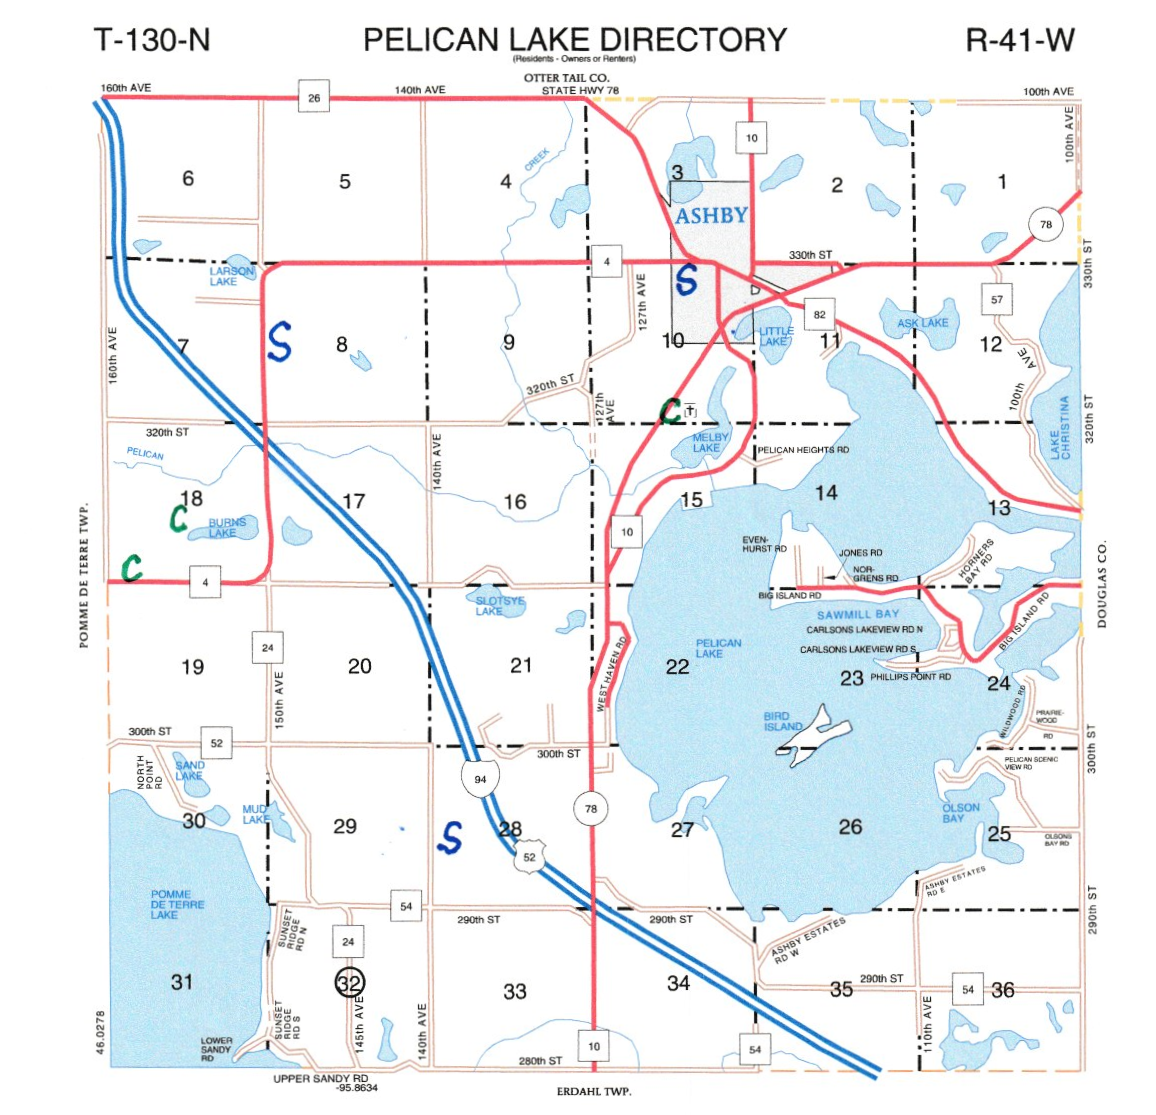 Pelican Lake Township early cemeteries and schools